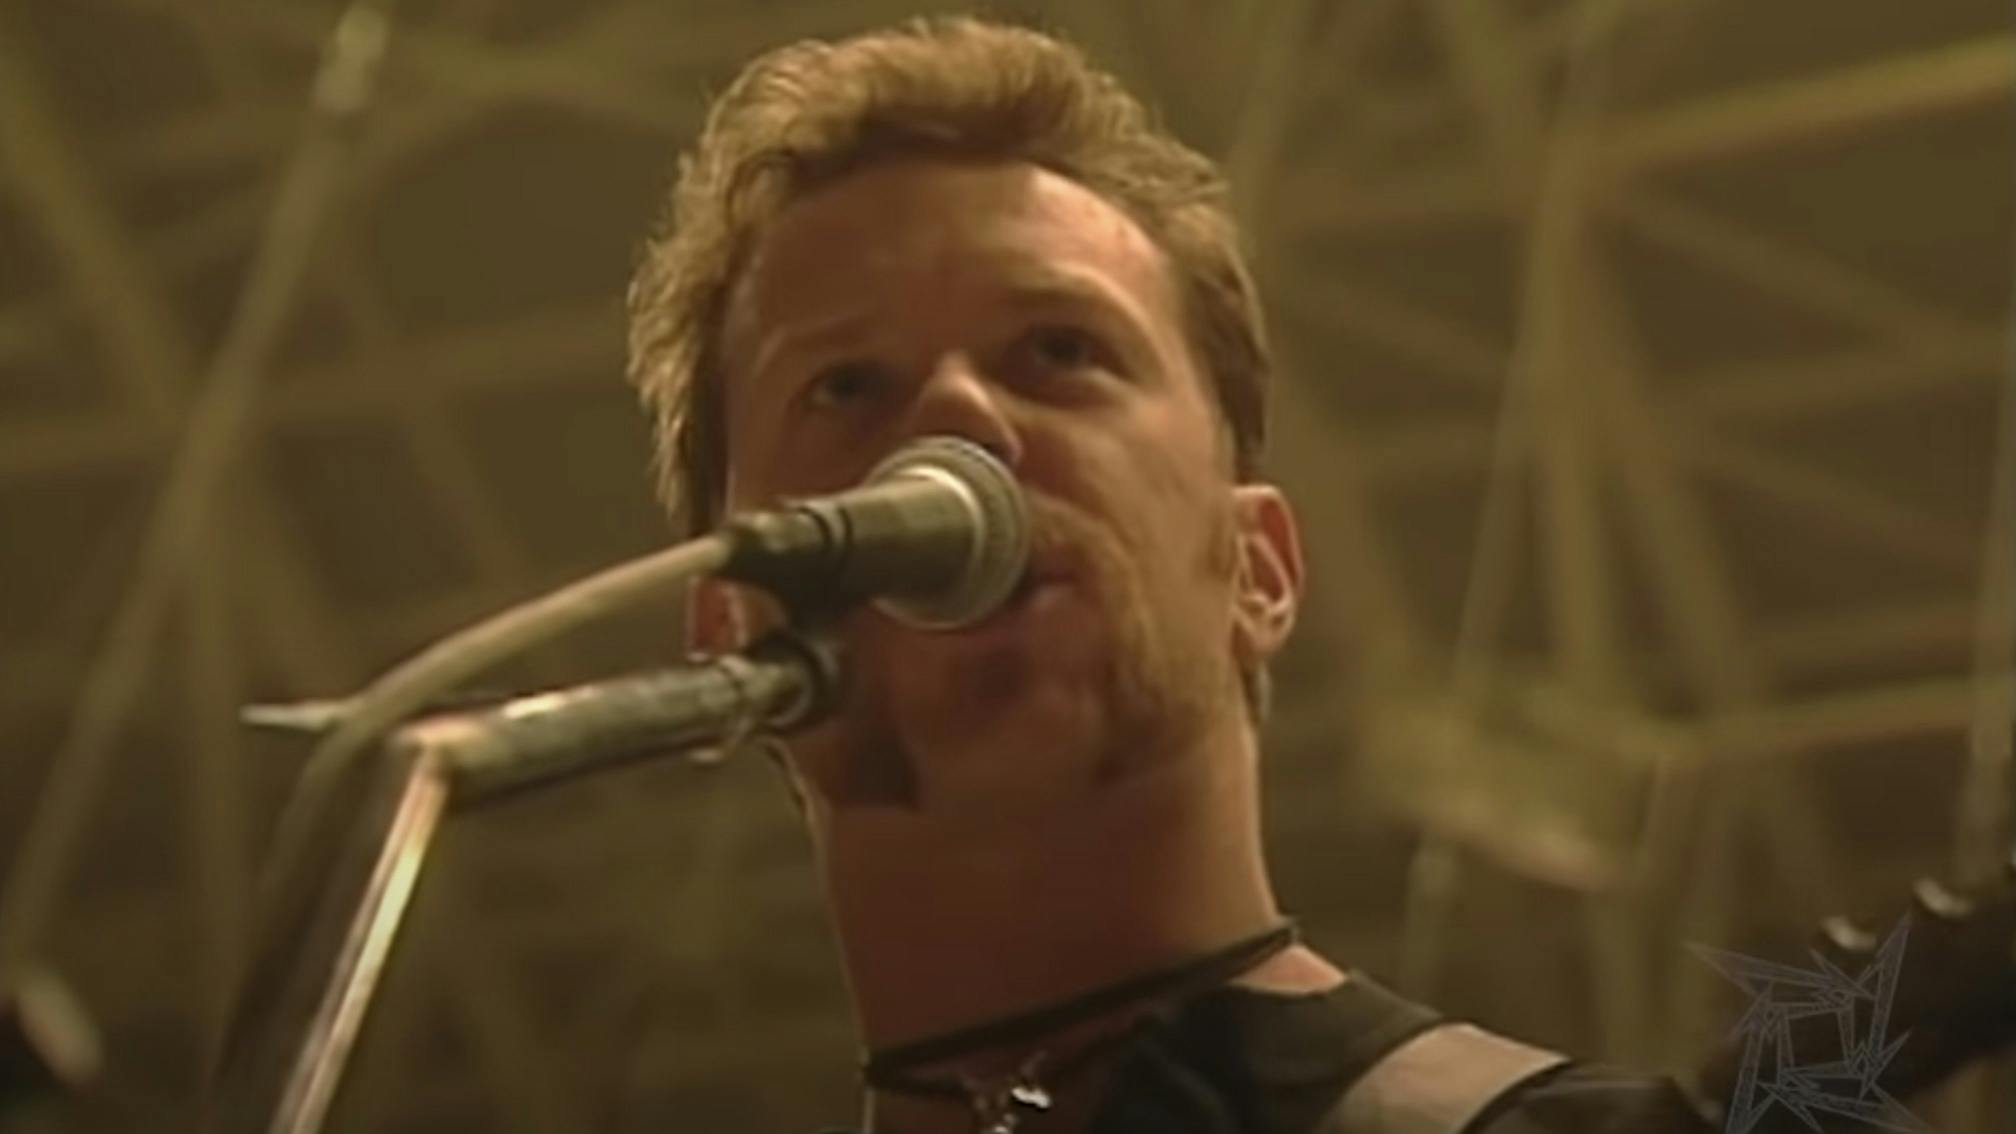 Metallica Stream 1997 Set Taken "From A Dusty Old VHS Tape"